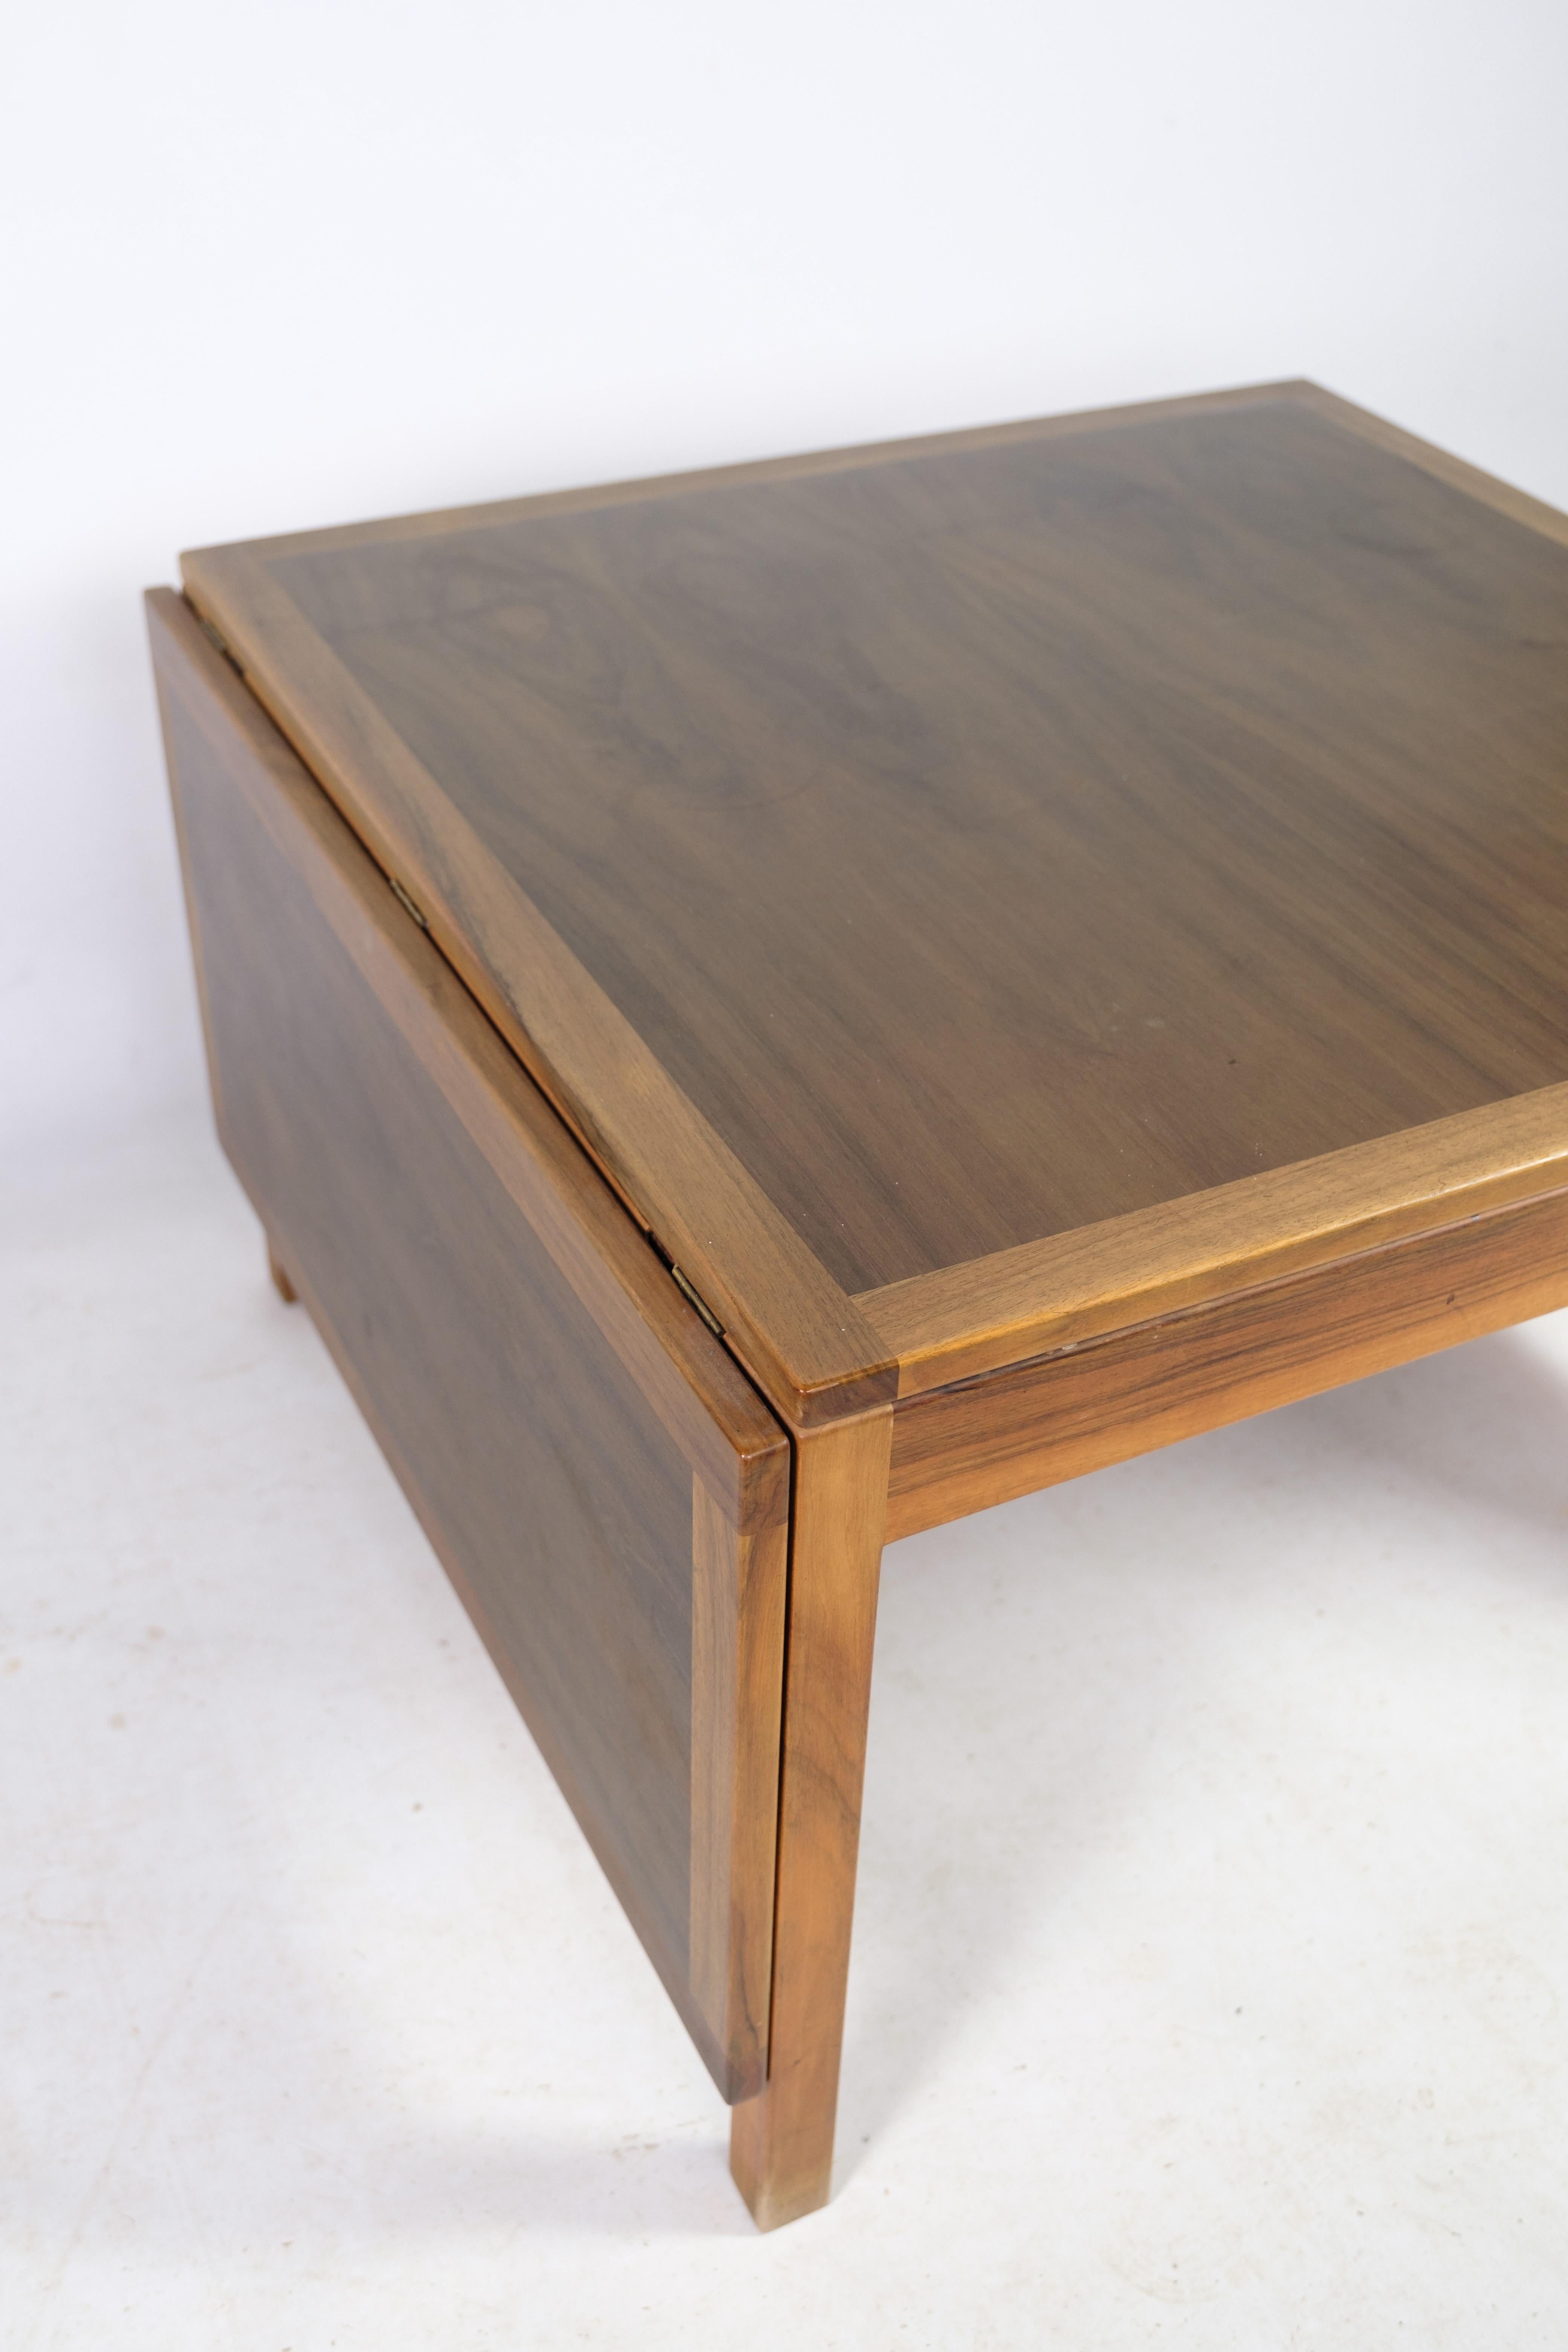 Scandinavian Modern Coffee Table, Model 5362 By Børge Mogensen Made By Fredericia Furniture 1960s For Sale